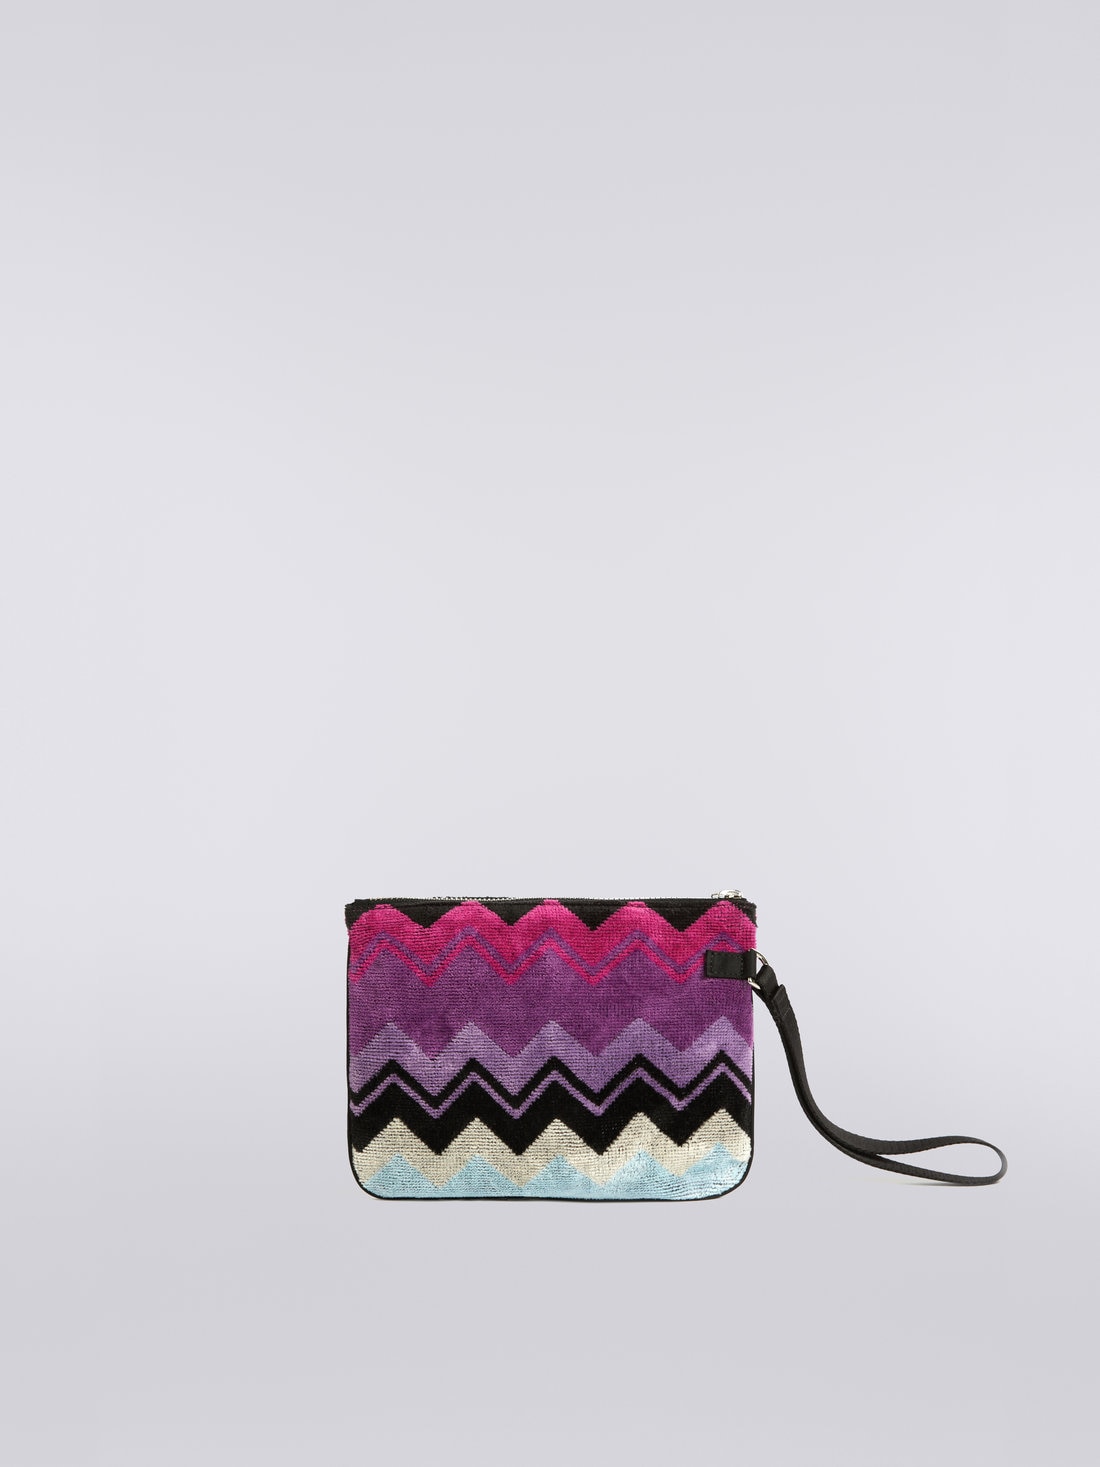 Cotton terry clutch with logo patch, Multicoloured  - 8051575698460 - 2